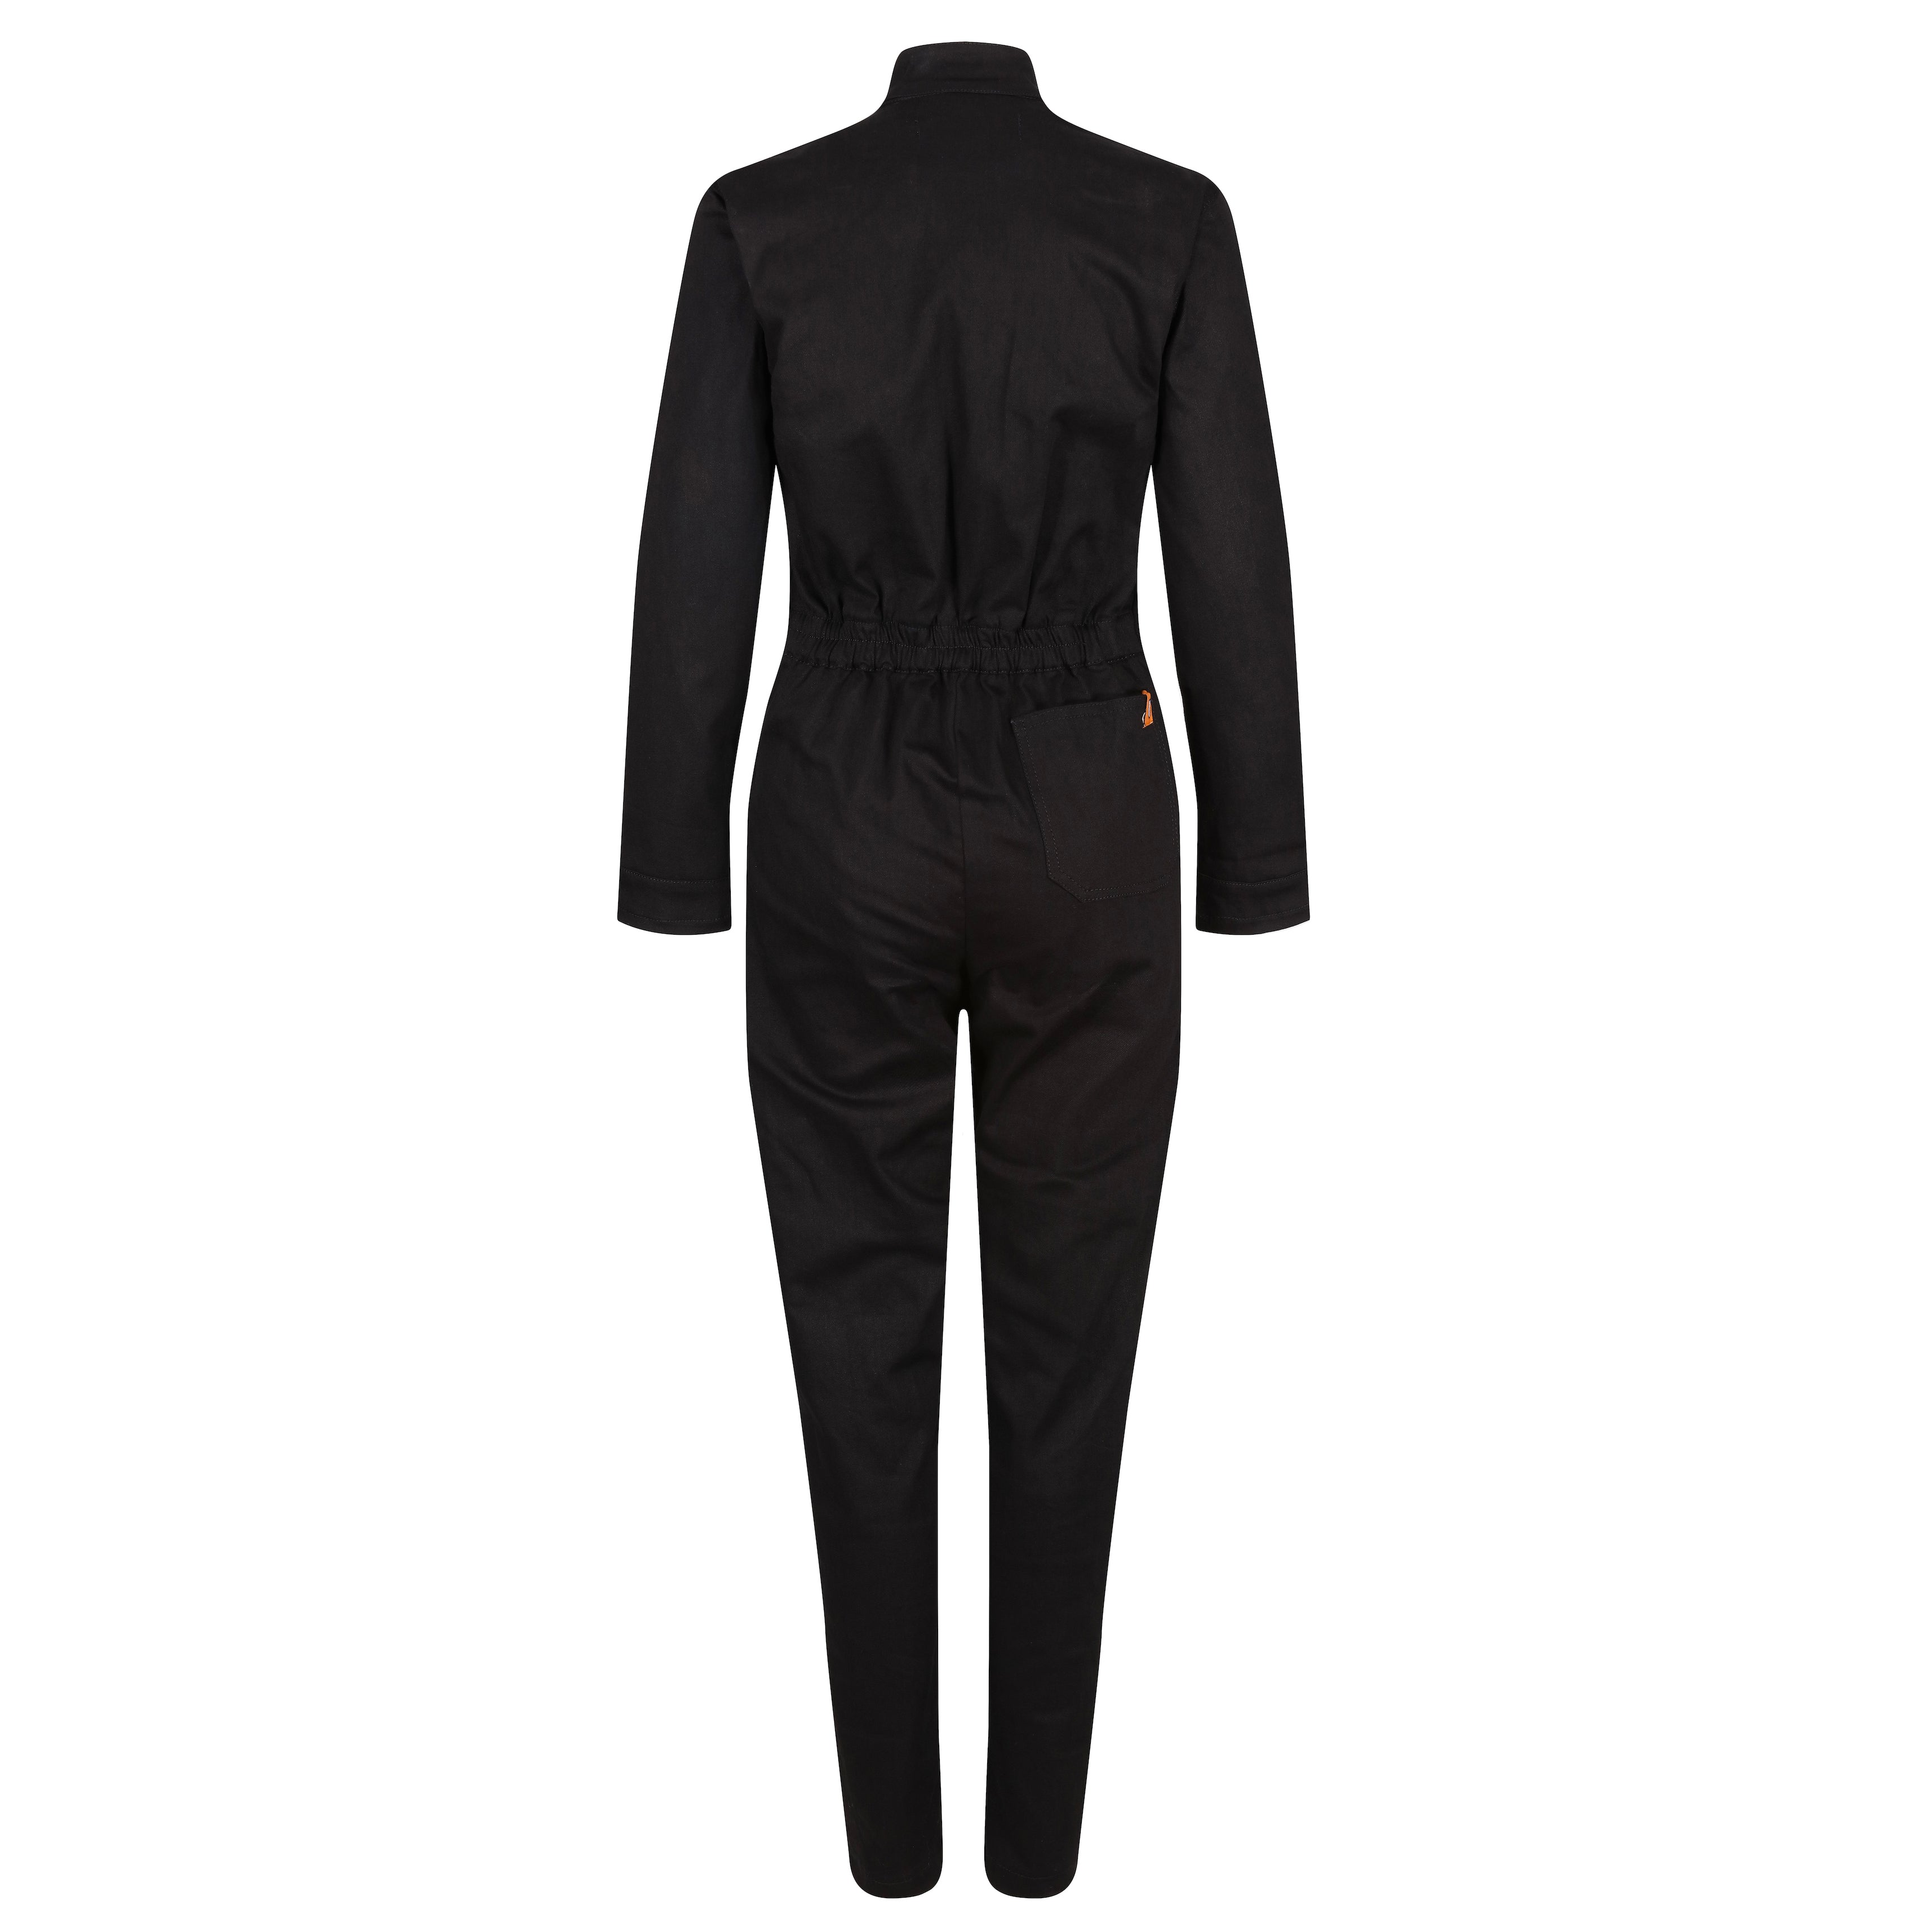 Black garage suit for women from MotoGirl from the back